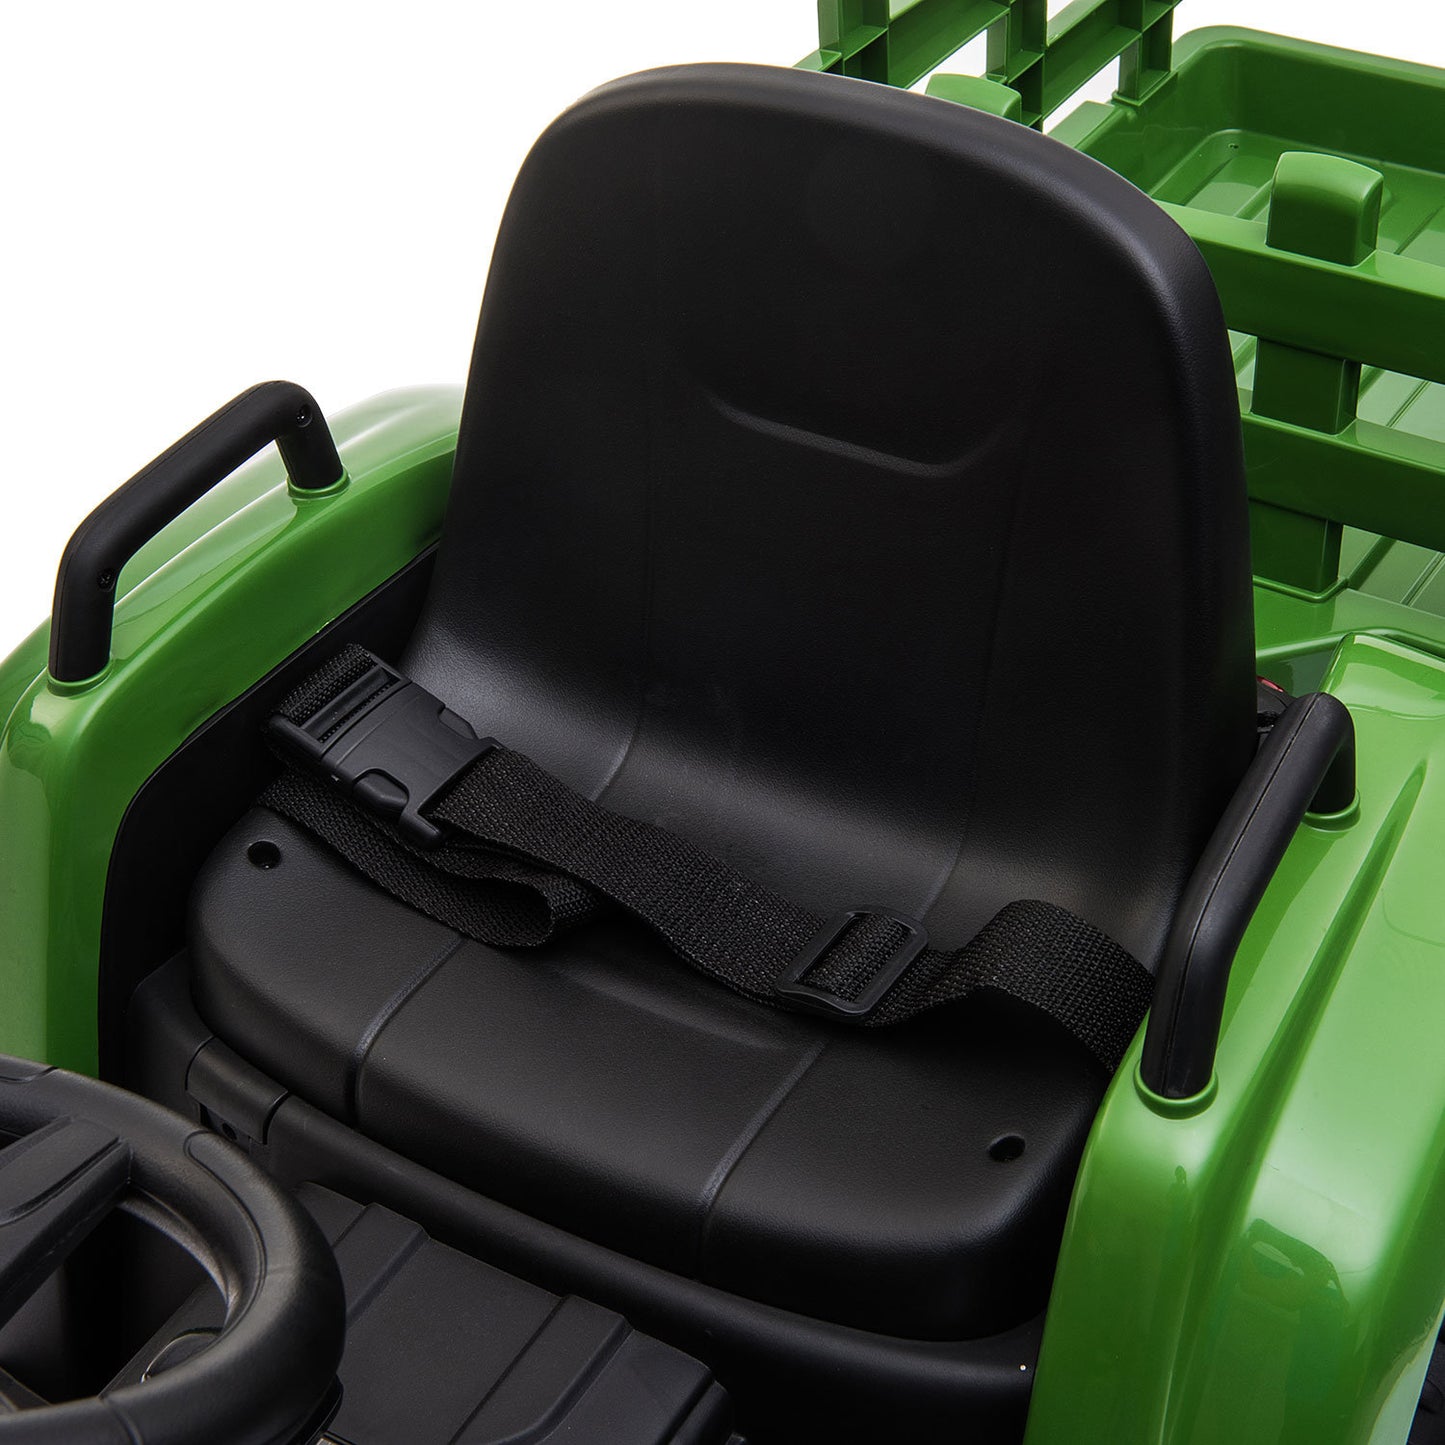 12V Kids Ride On Tractor with Trailer, Battery Powered Electric Car w/ Music, USB, Music, LED Lights, Vehicle Toy for 3 to 6 Ages, Dark Green